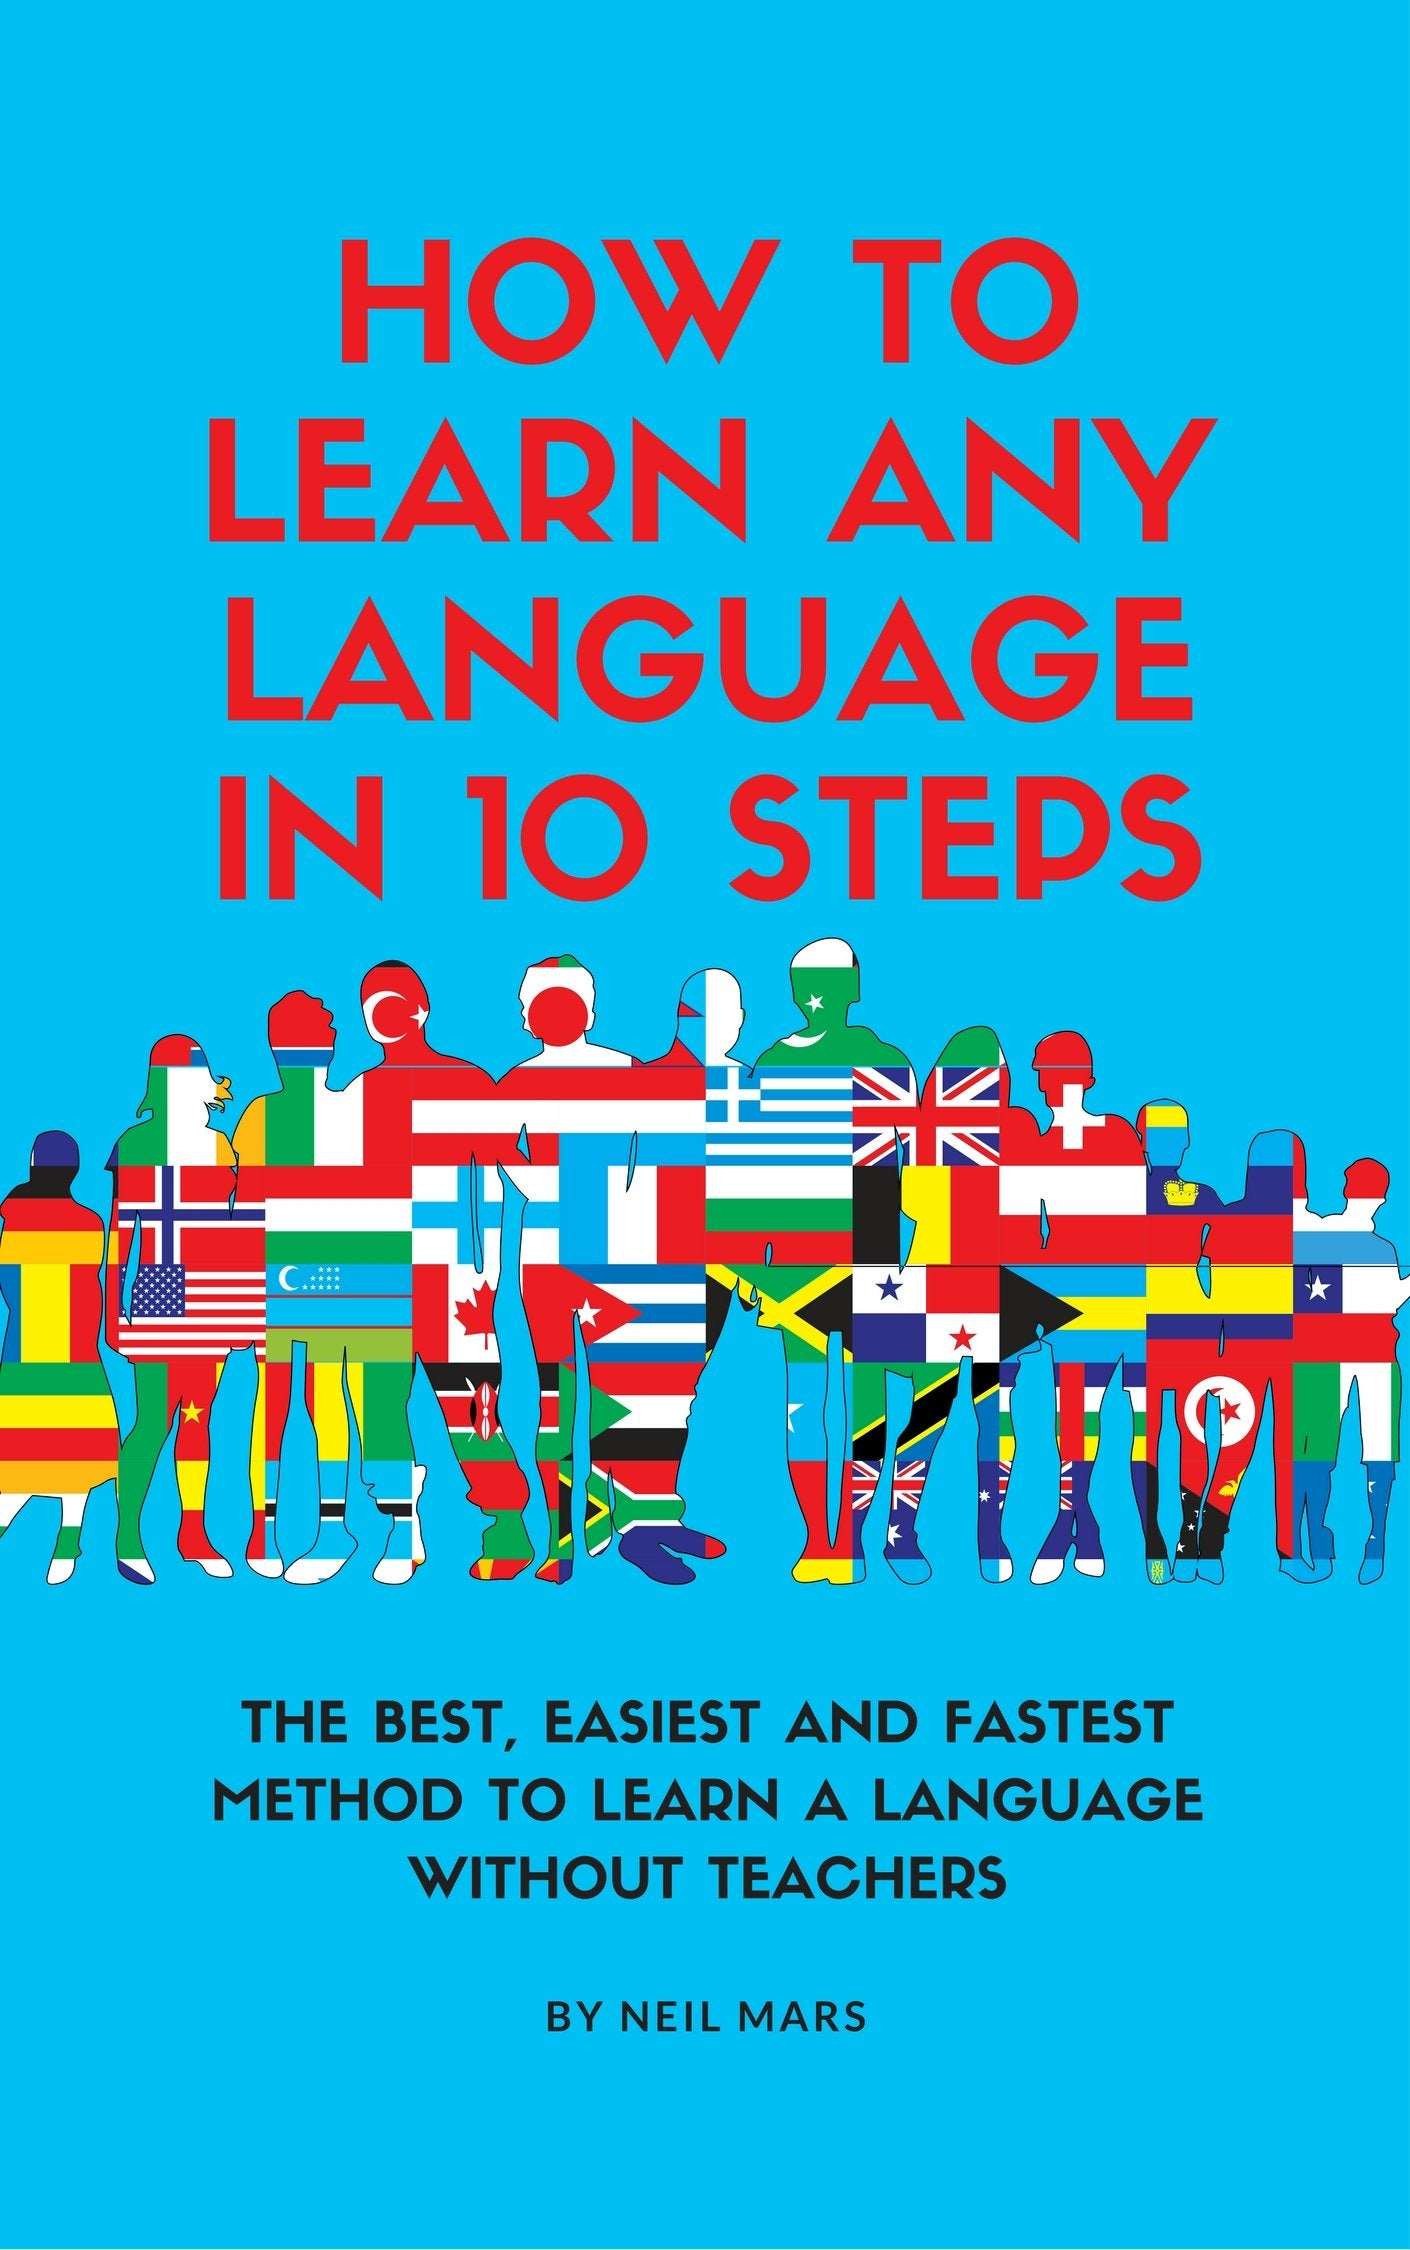 How to Learn Any language in 10 Steps